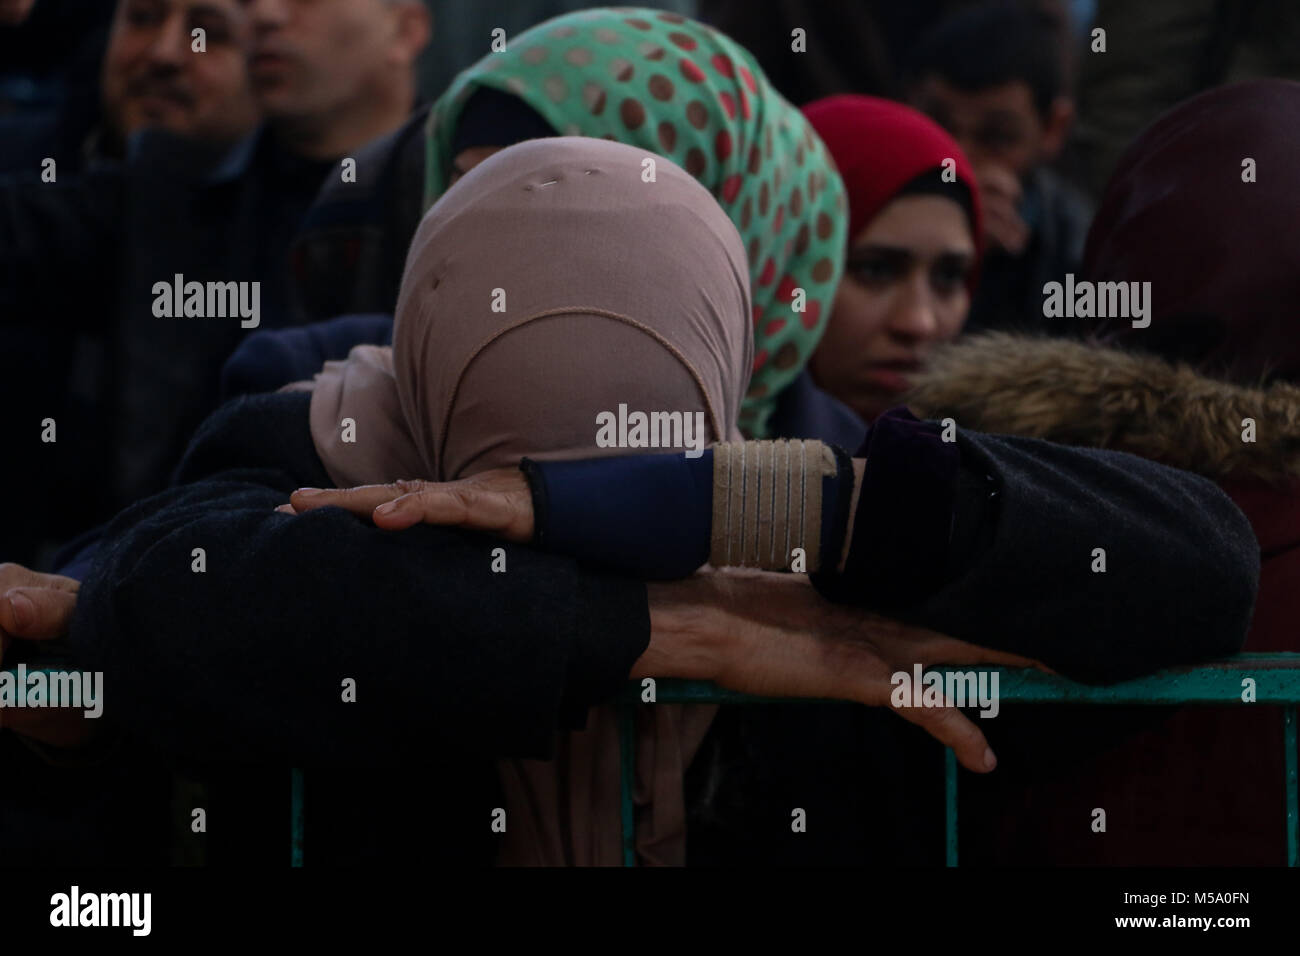 Rafah border. February 21, 2018 - Dozens of Palestinian wait in the Abu Yousef al-Najjar hall in the southern Gaza Strip town of Khan Younis in order to travel to Egypt through the Rafah border crossing. Egyptian authorities have opened the Rafah Crossing in both directions for four days, starting from today, in order to allow the passage of students studying overseas, of people working abroad, and of patients in need of medical treatment outside Gaza Credit: Ahmad Hasaballah/ImagesLive/ZUMA Wire/Alamy Live News Stock Photo